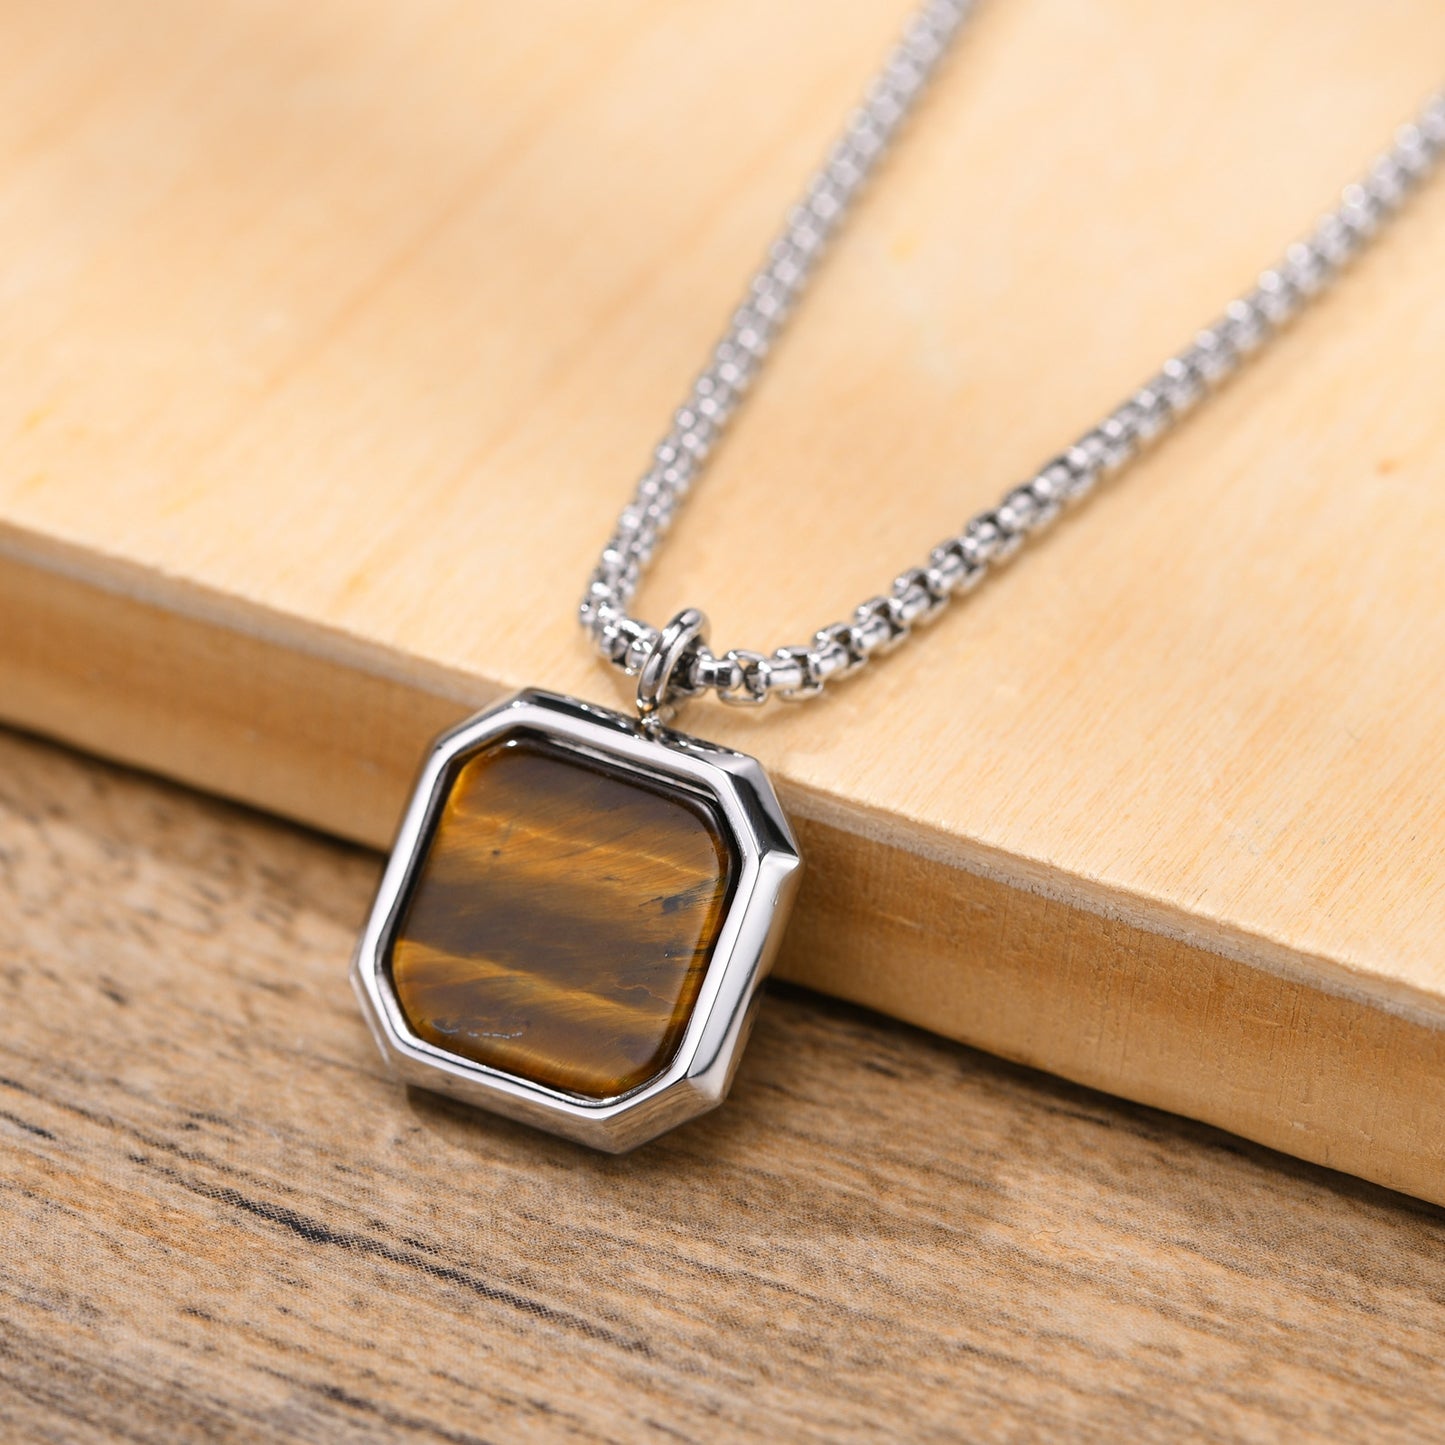 Pendiente y Collar para Hombre o Mujer Stylish Men Square Natural Stone Necklace, Solid Stainless Steel Geometric Polygon Pendant, Casual Punk Boy Gift Jewelry